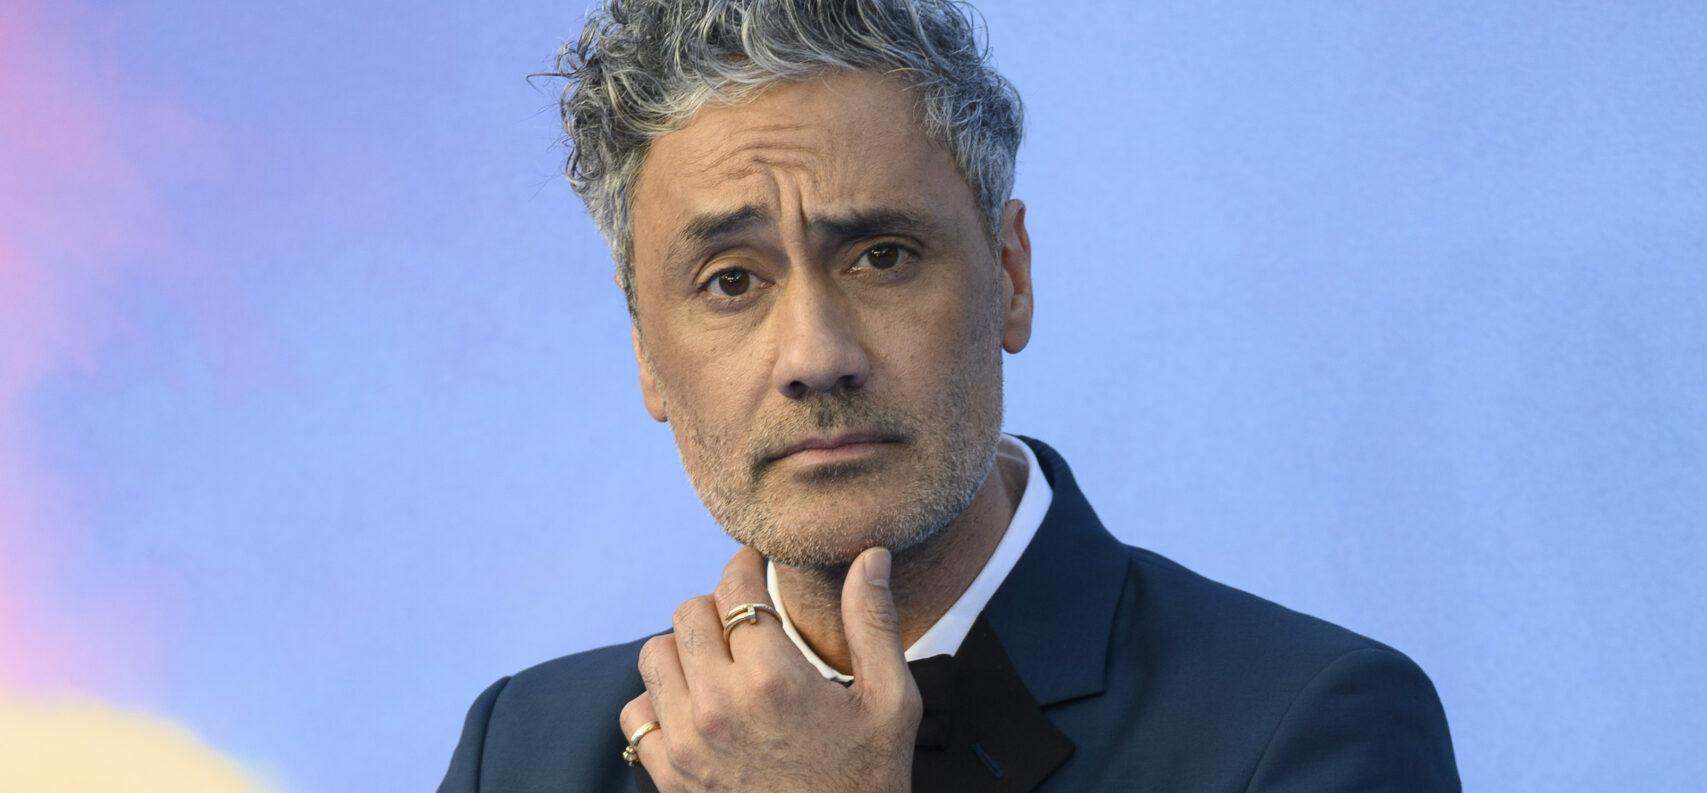 Taika Waititi Shares A New Update On His ‘Star Wars’ Movie